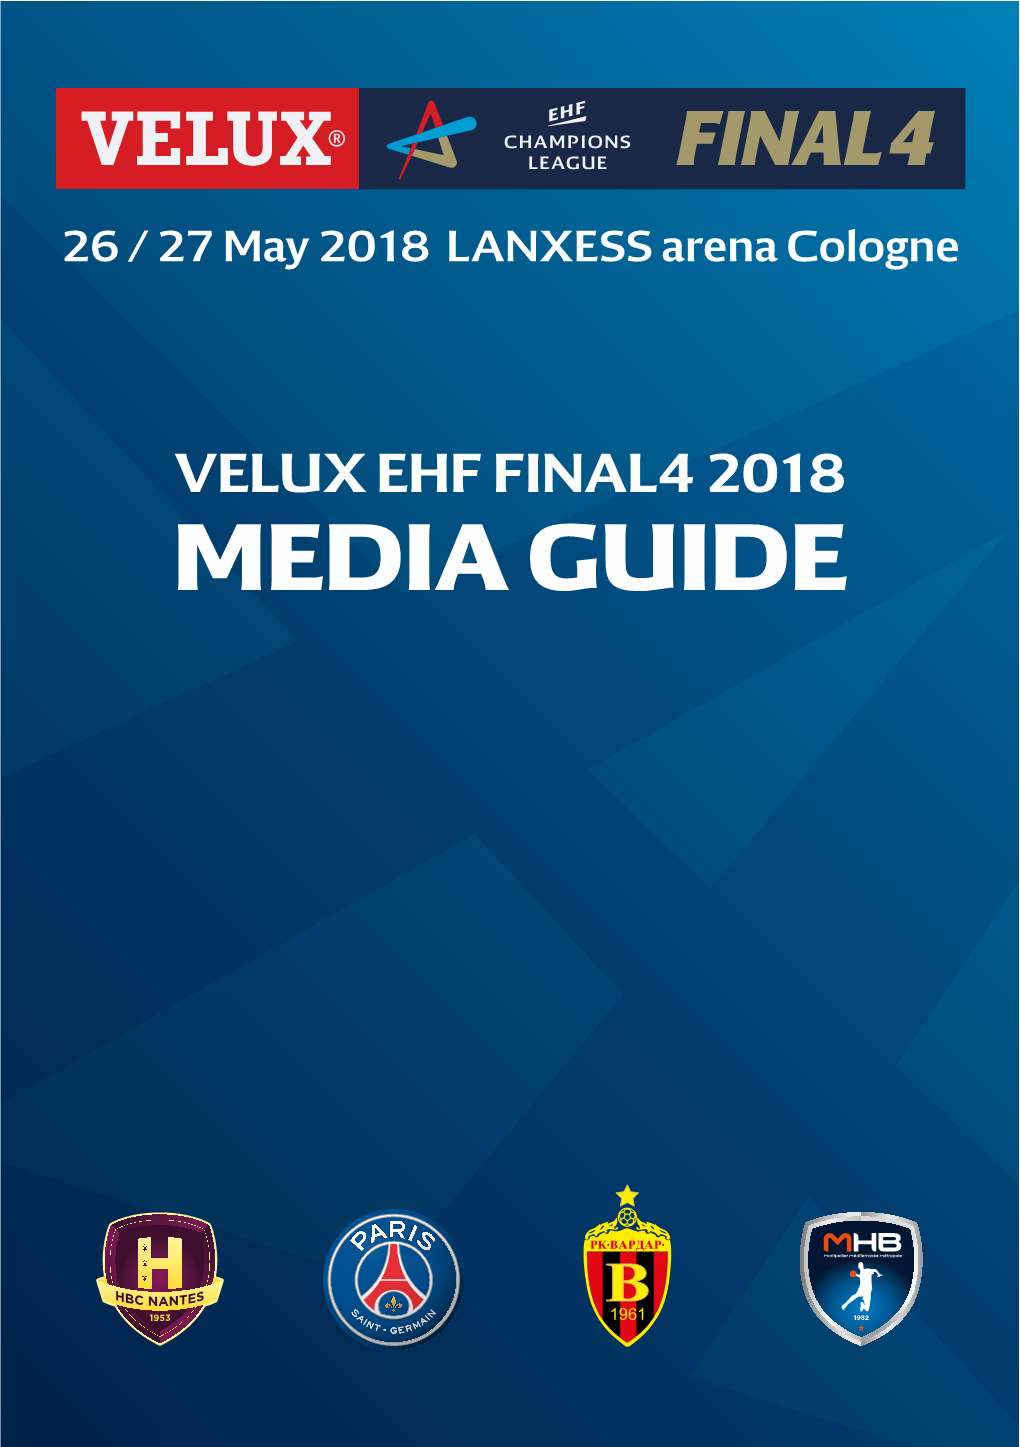 VELUX EHF FINAL4 2018 MEDIA GUIDE Dear Media Representatve, Welcome to the Ninth Editon of the VELUX EHF FINAL4 in Cologne’S LANXESS Arena